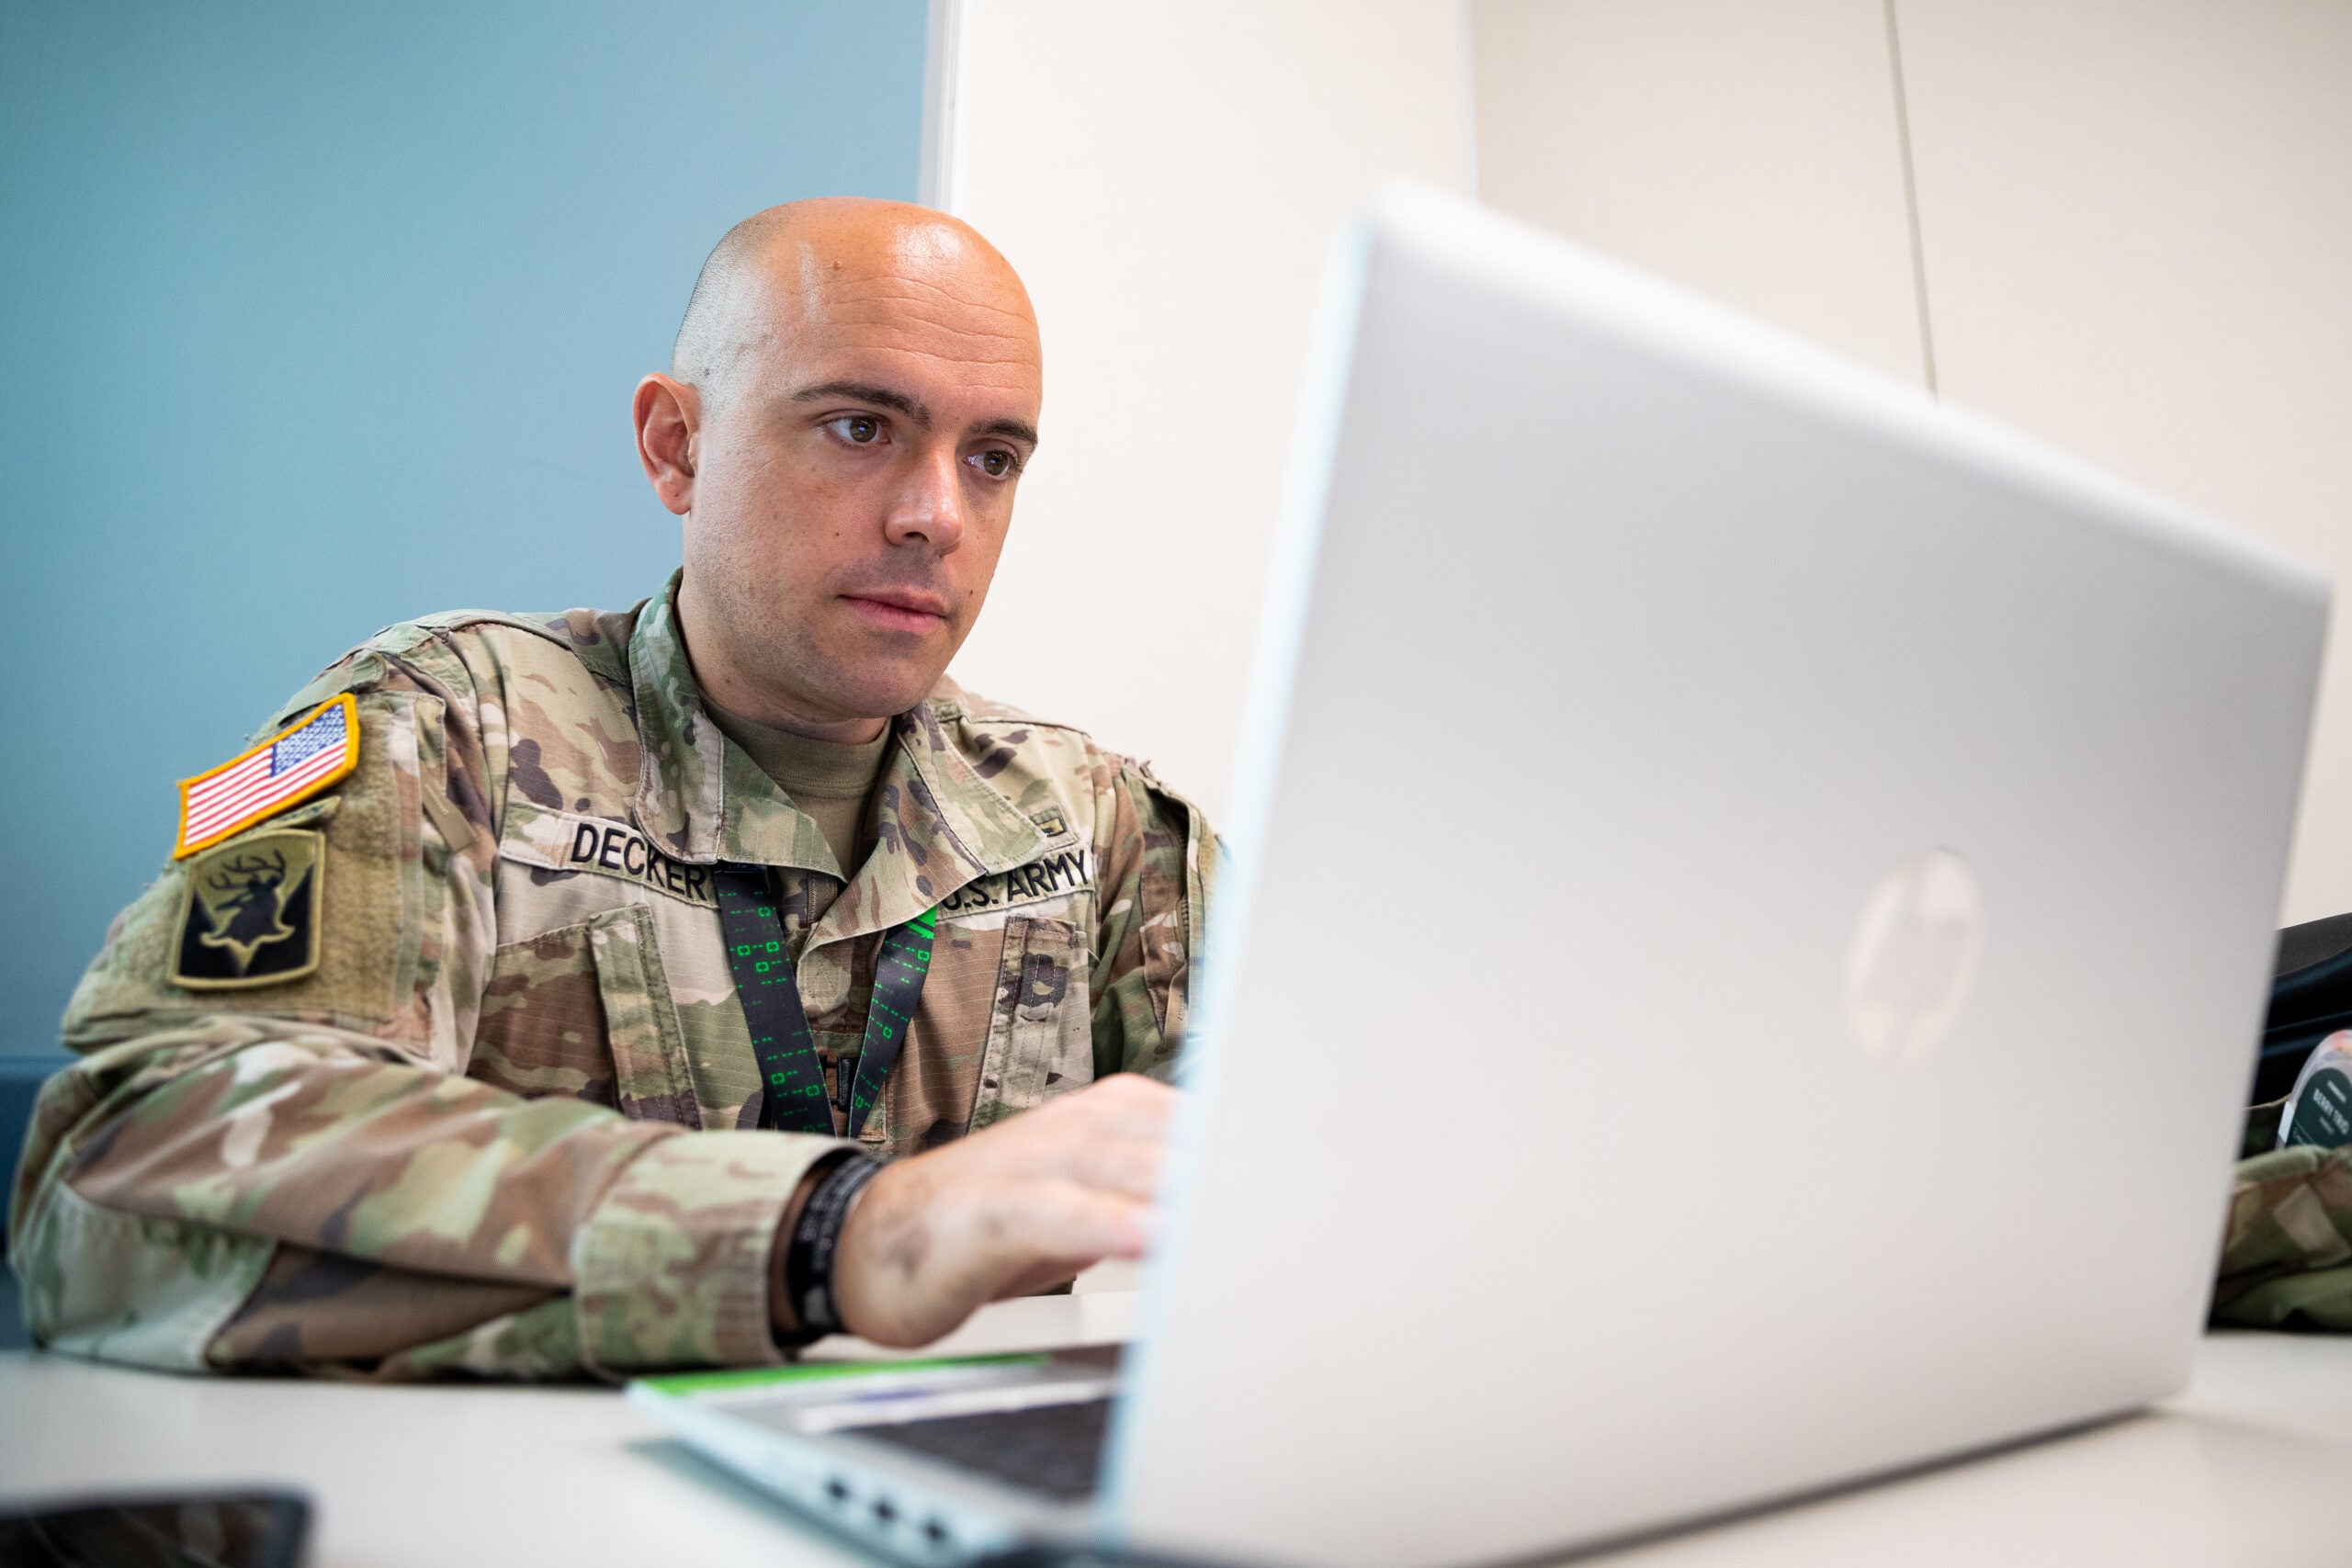 U.S. Army Capt. Vergil Decker, an Army Judge Advocate General's (JAG) Corps attorney assigned to the New Hampshire Army National Guard, works on a laptop at Camp Nett, Niantic, Connecticut, June 16, 2022. Personnel from the JAG played a key role in Cyber Yankee, a cyber training exercise, advising on cyber law issues. (U.S. Army photo by Sgt. Matthew Lucibello)